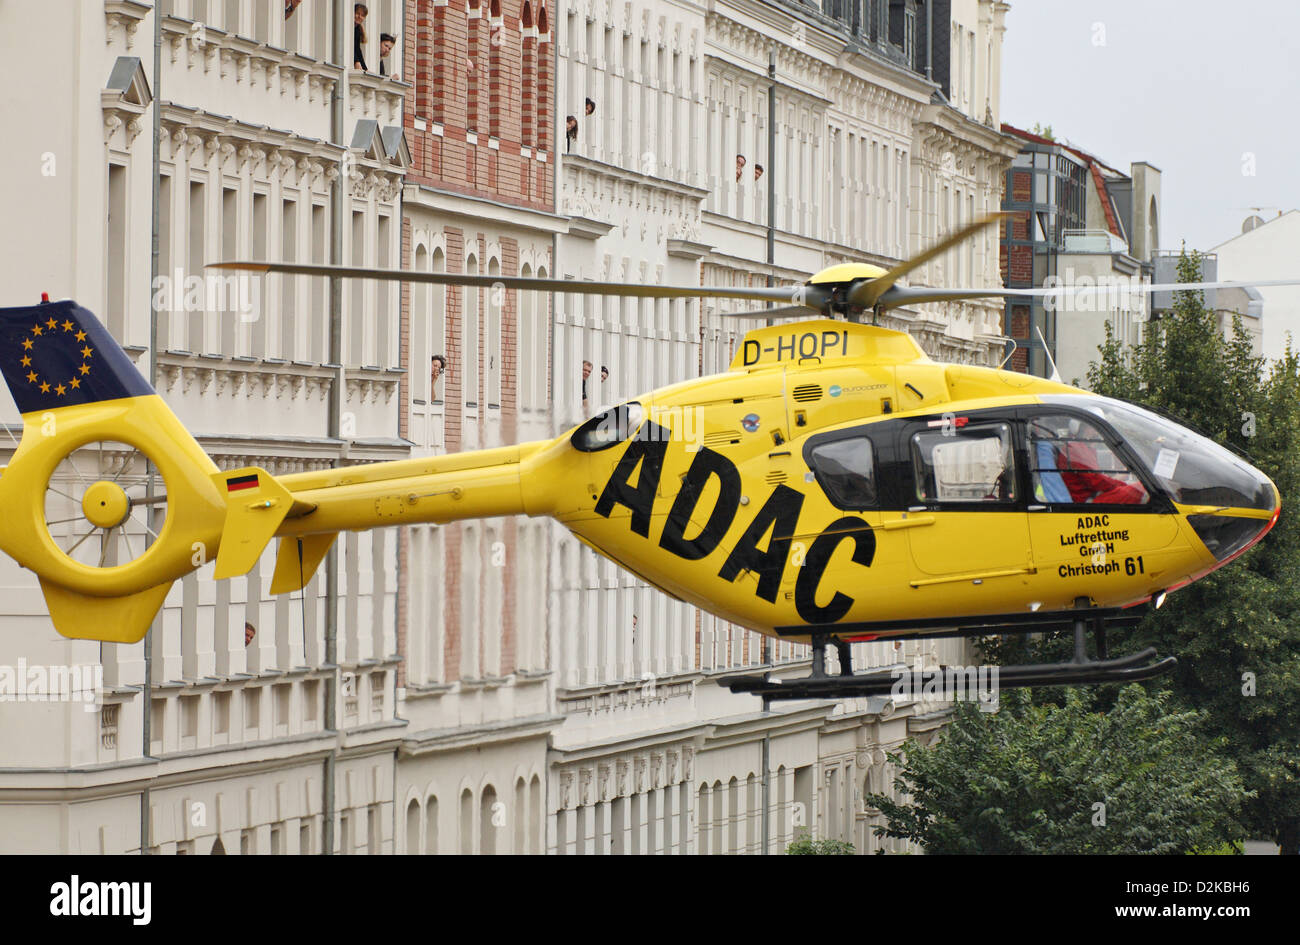 Leipzig, Germany, ADAC rescue helicopter Christoph 61 in downtown Stock Photo